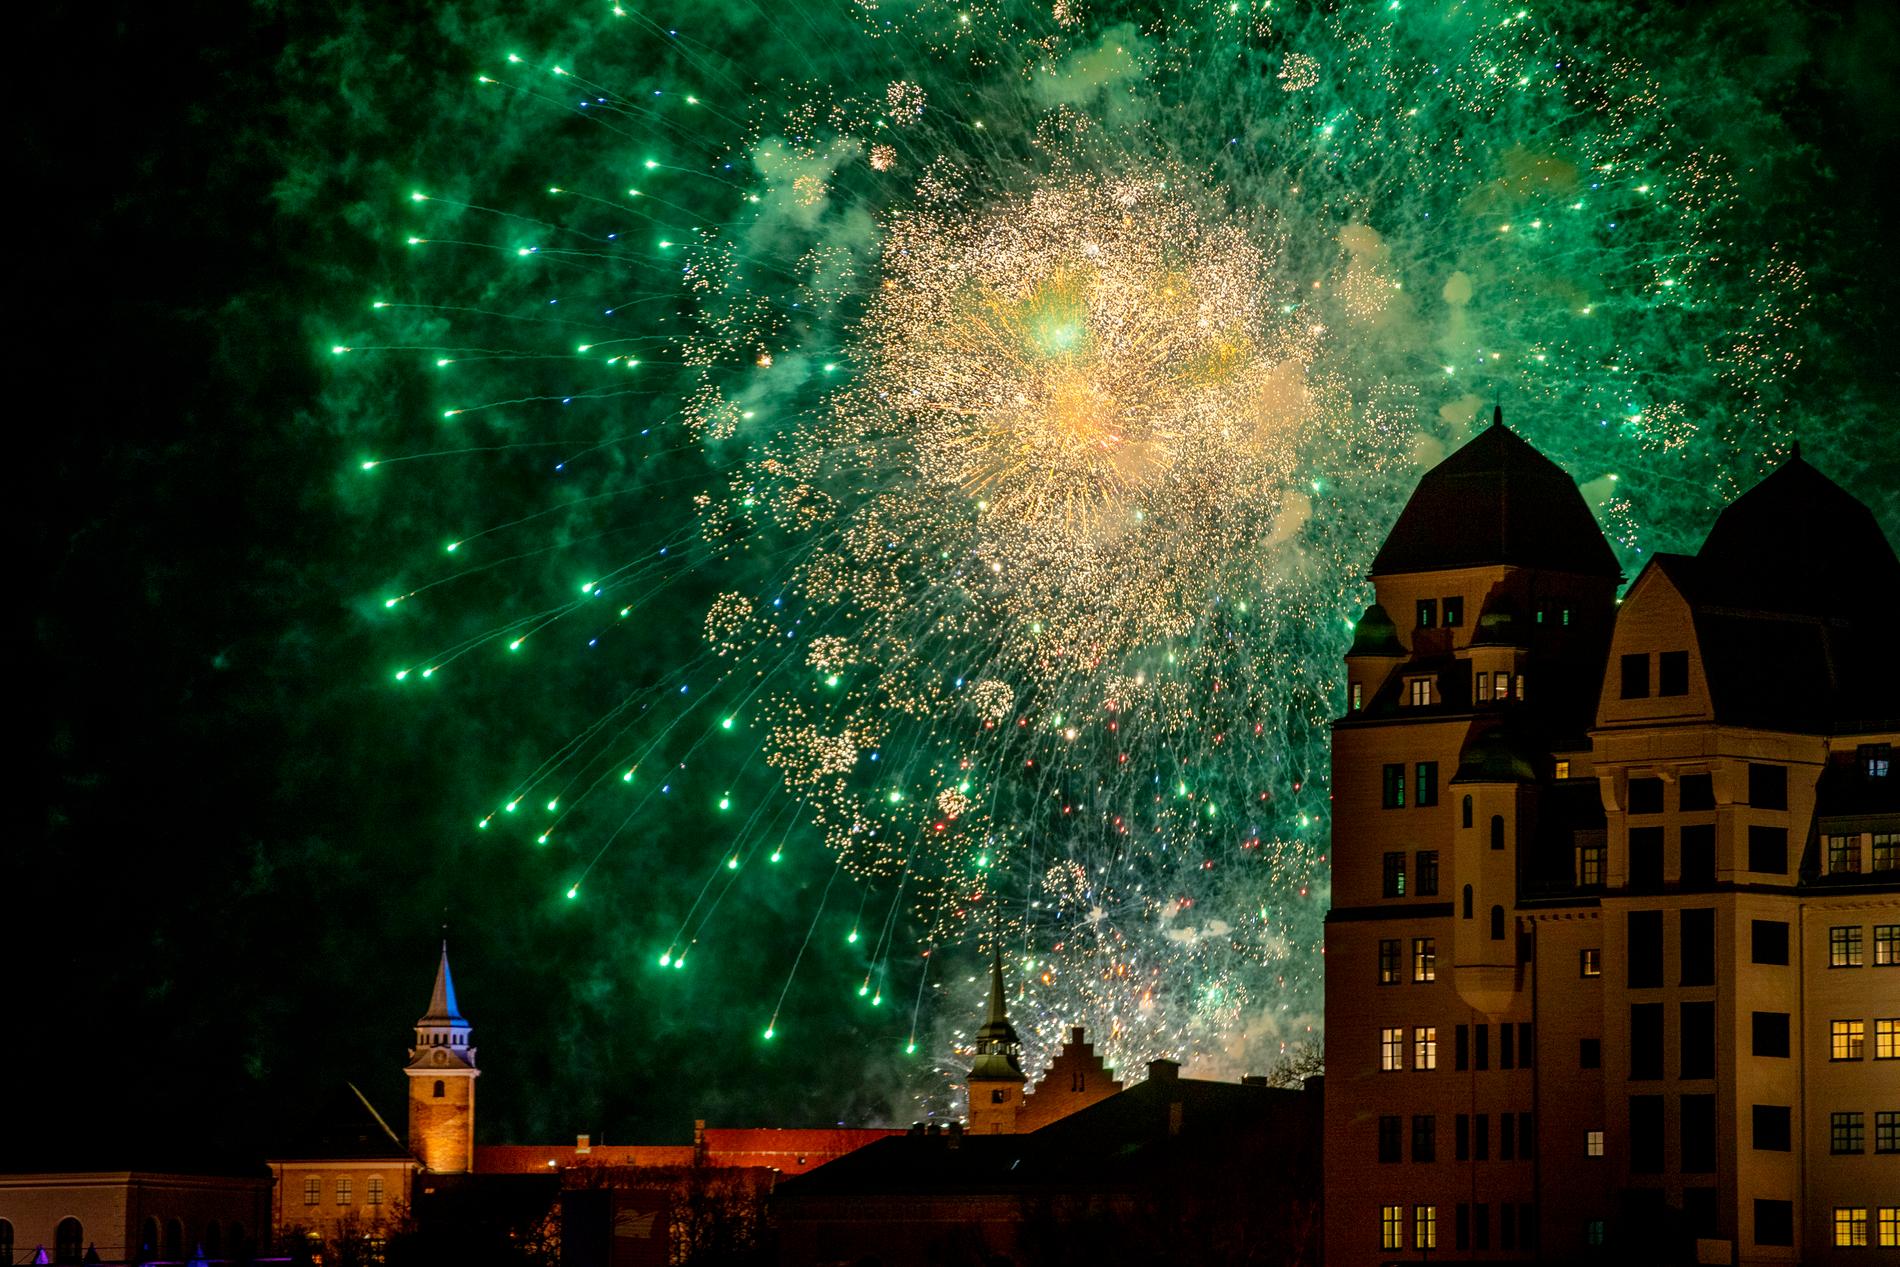 Oslo, the only big city to set off fireworks: – A sudden and unexpected sound comes upon the animals as hell